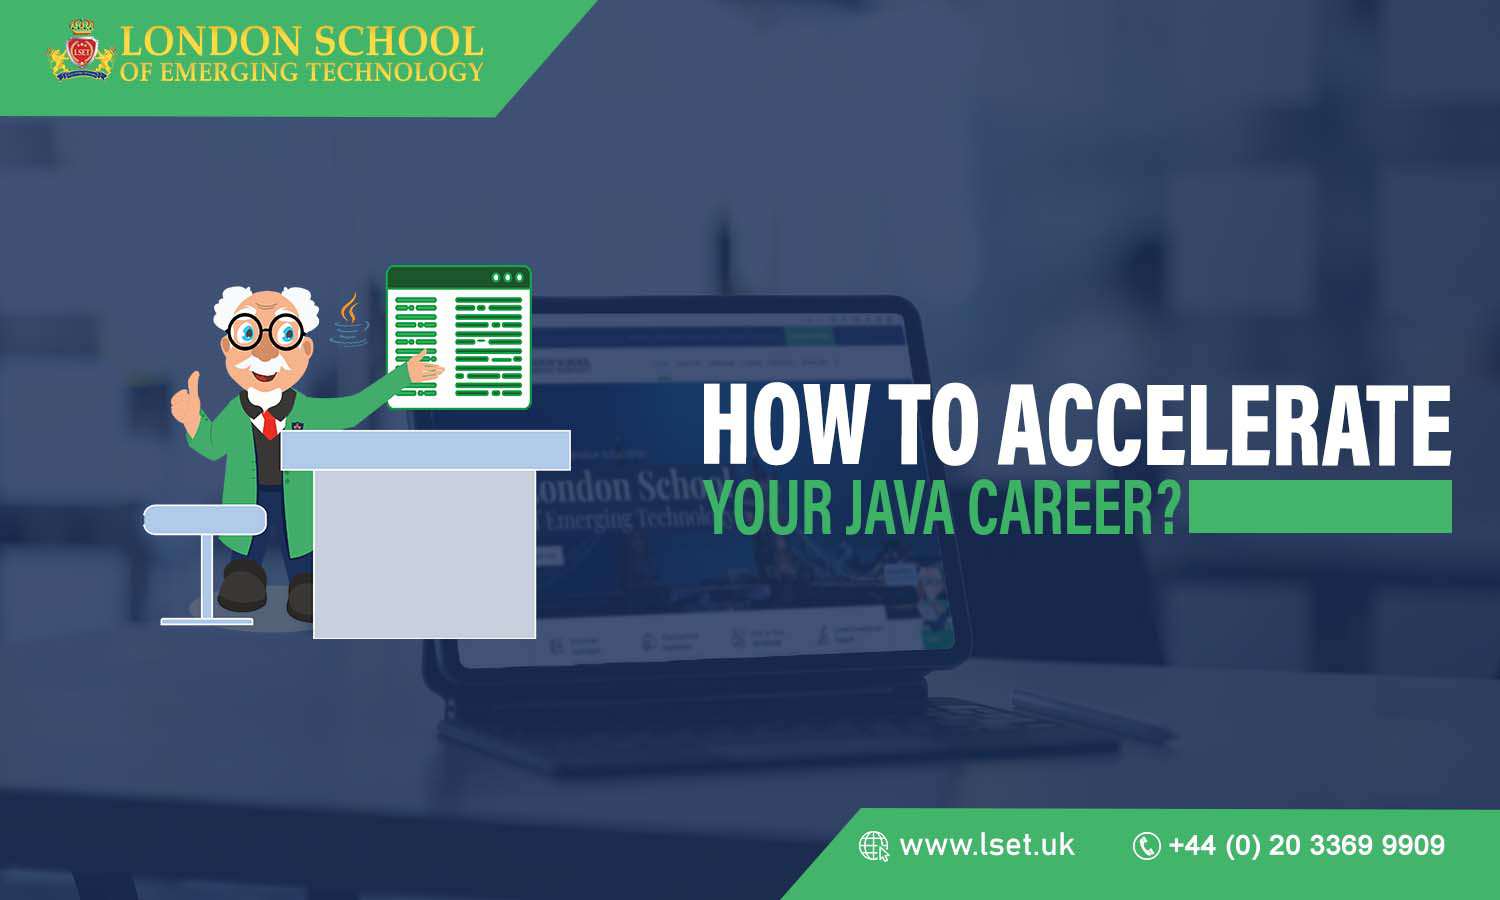 How to Accelerate Your Java Career